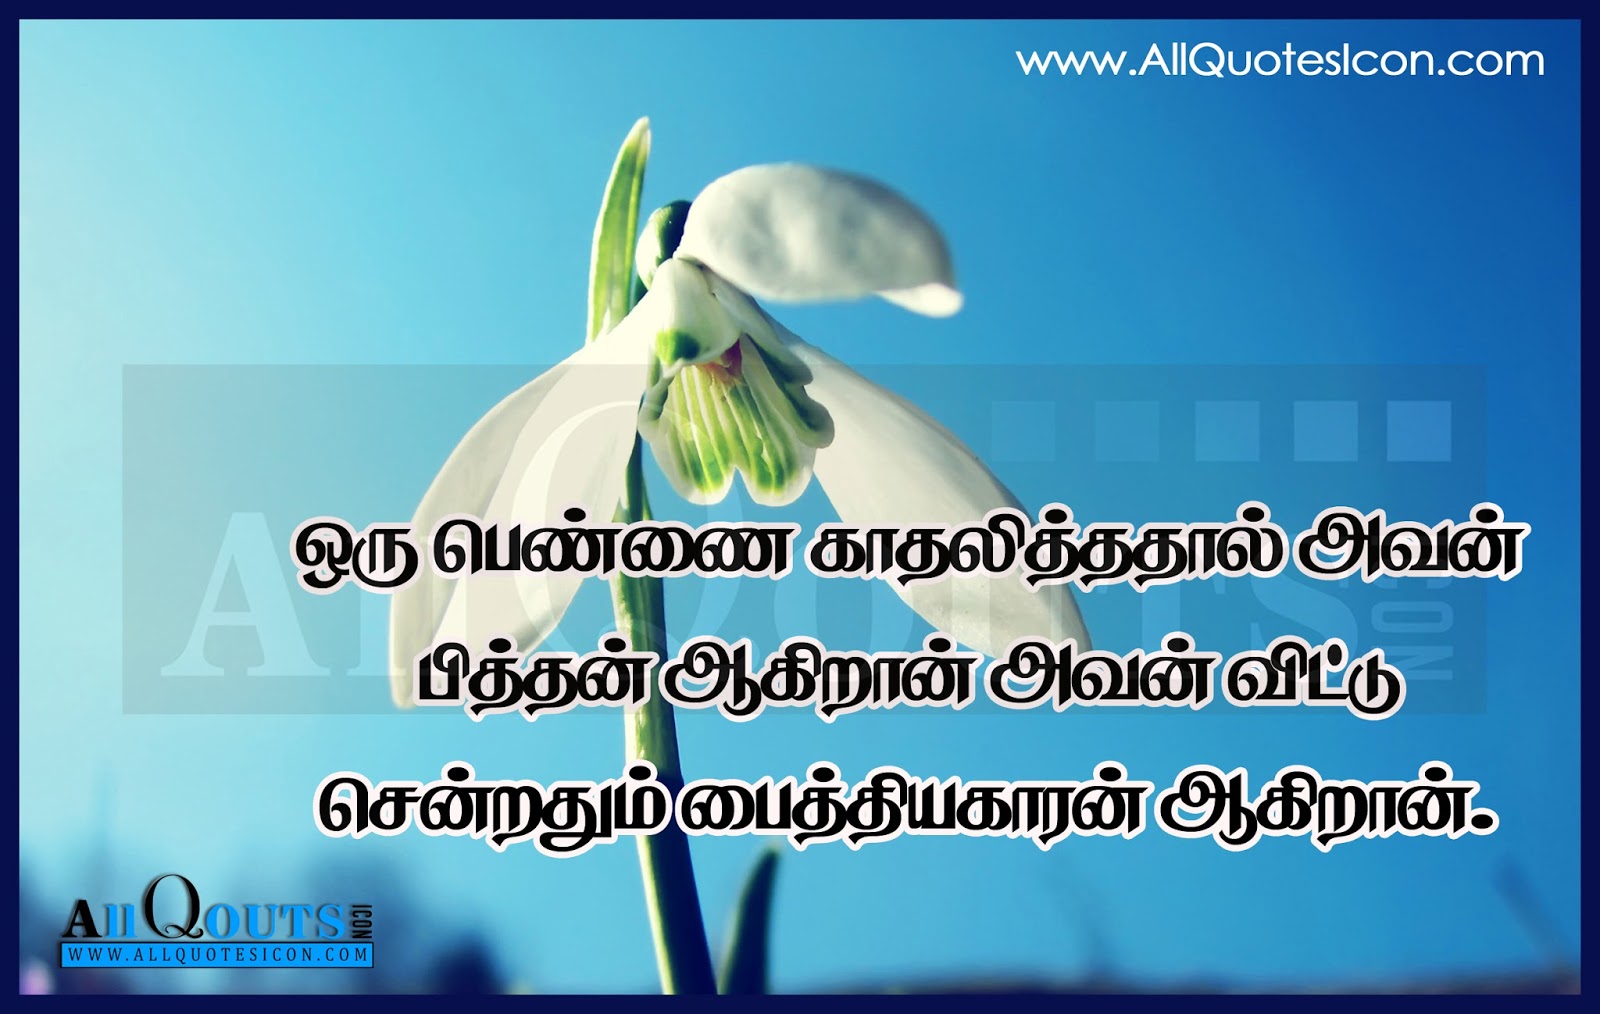 Tamil Life Quotes Motivation Inspiration Thoughts Sayings